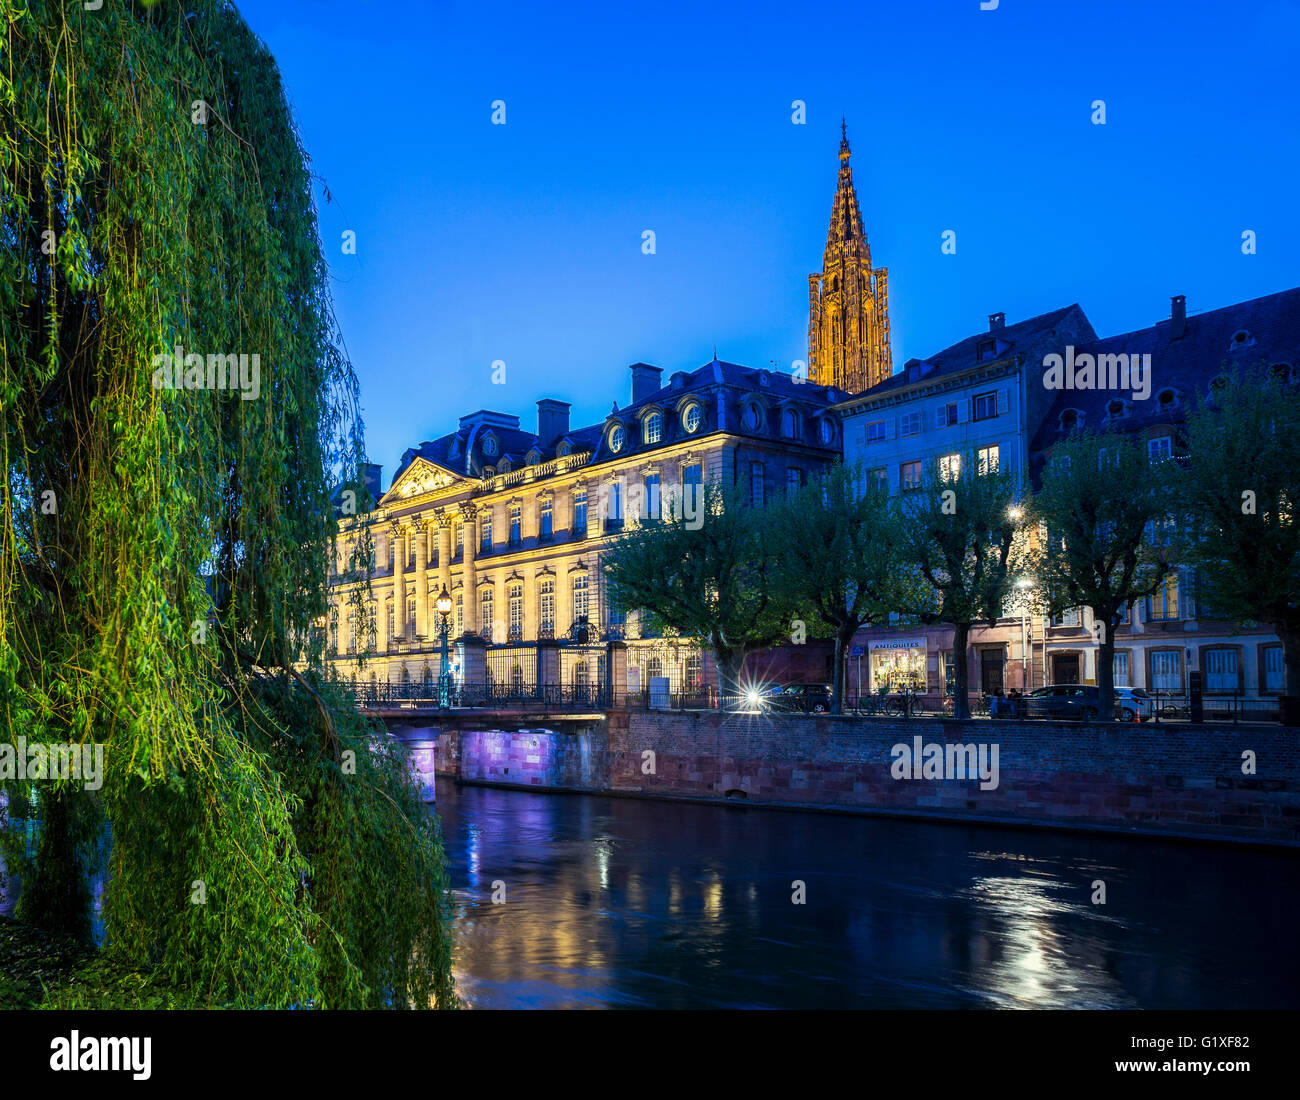 Palais Rohan, Rohan Palace 18th Century and cathedral's spire at night, Strasbourg, Alsace, France Stock Photo